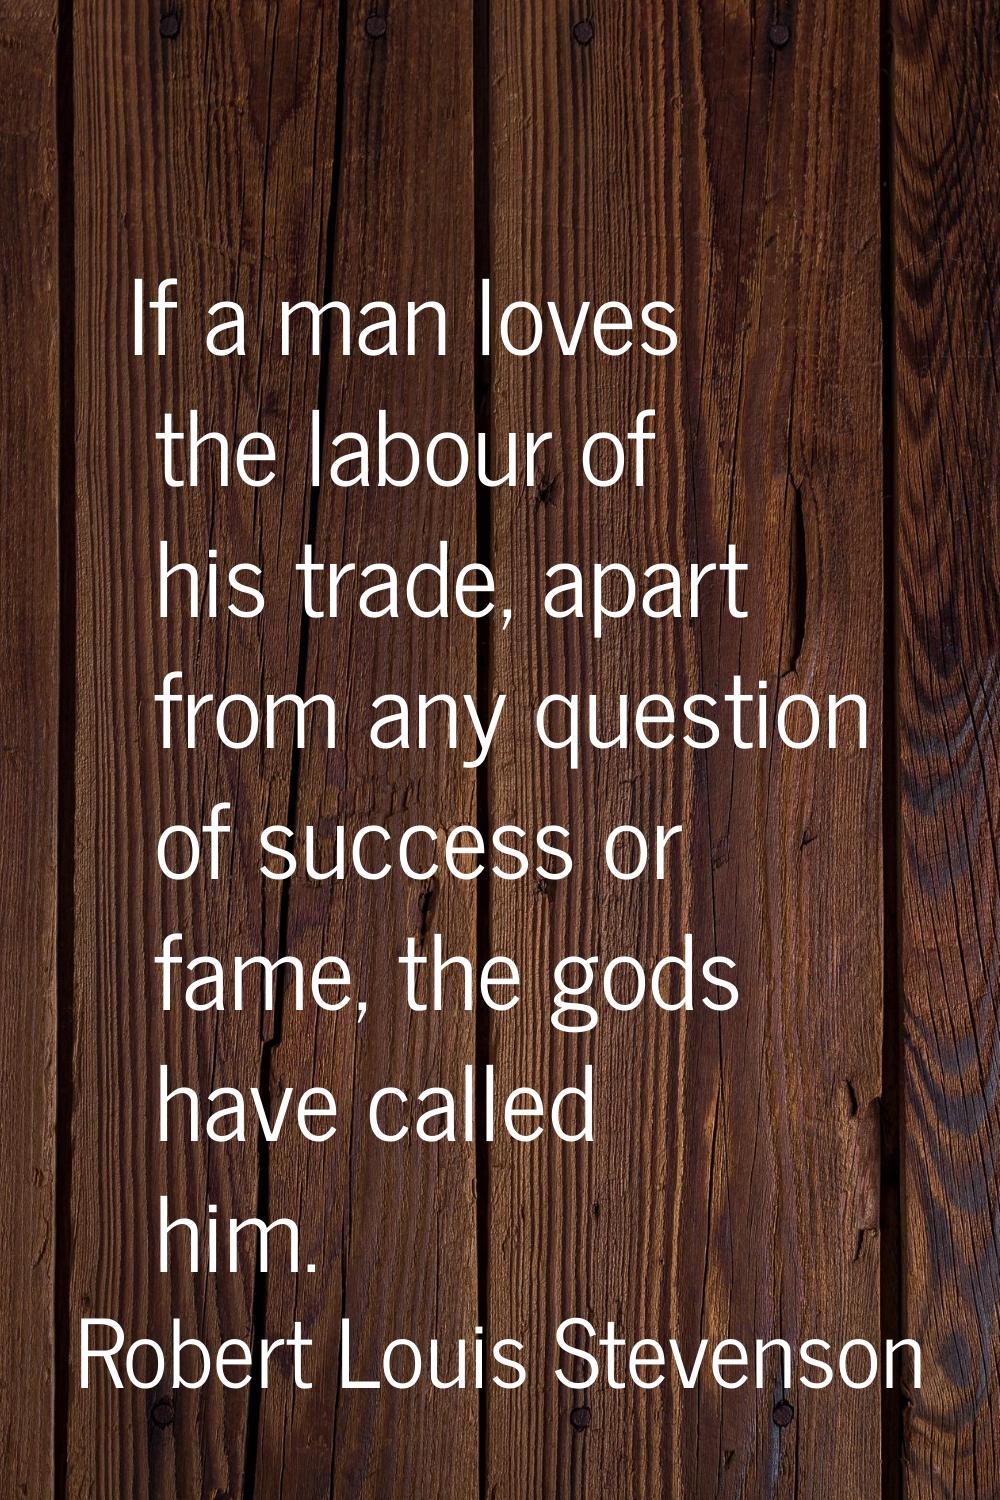 If a man loves the labour of his trade, apart from any question of success or fame, the gods have c